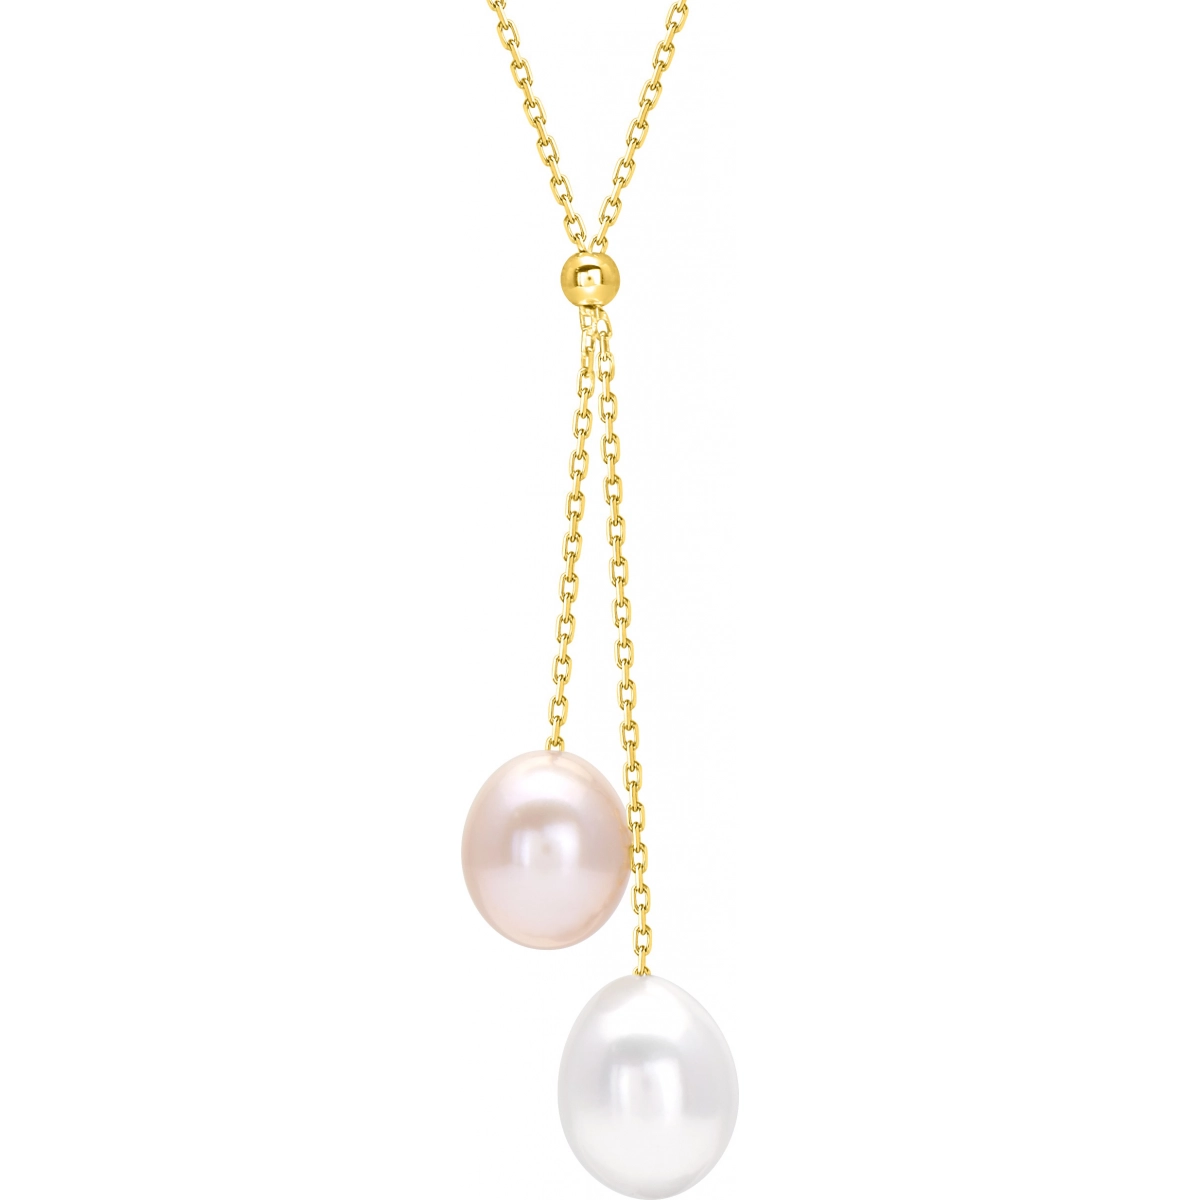 Necklace w. cult.FWpearl 9K YG - Size: 42  Lua Blanca  393023.P0.42